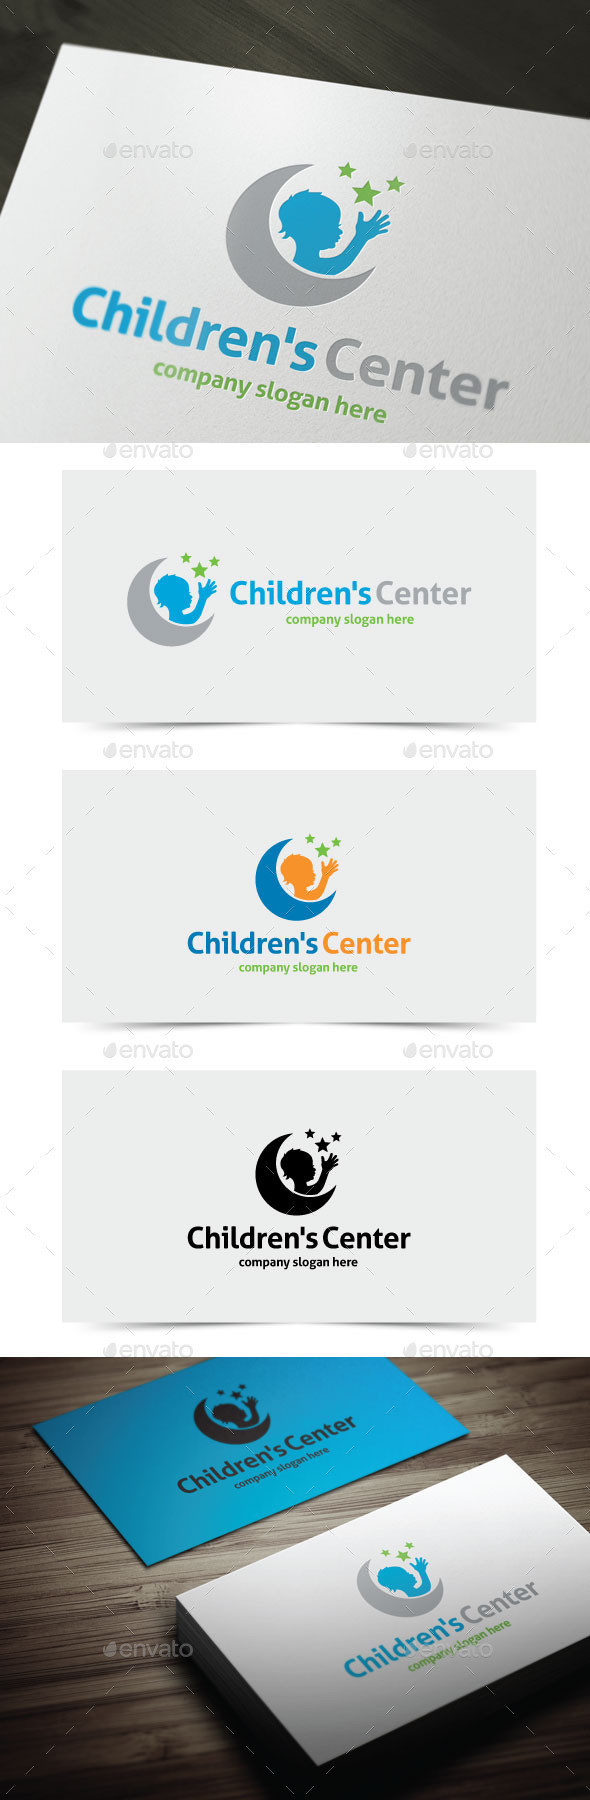 Childrens center preview